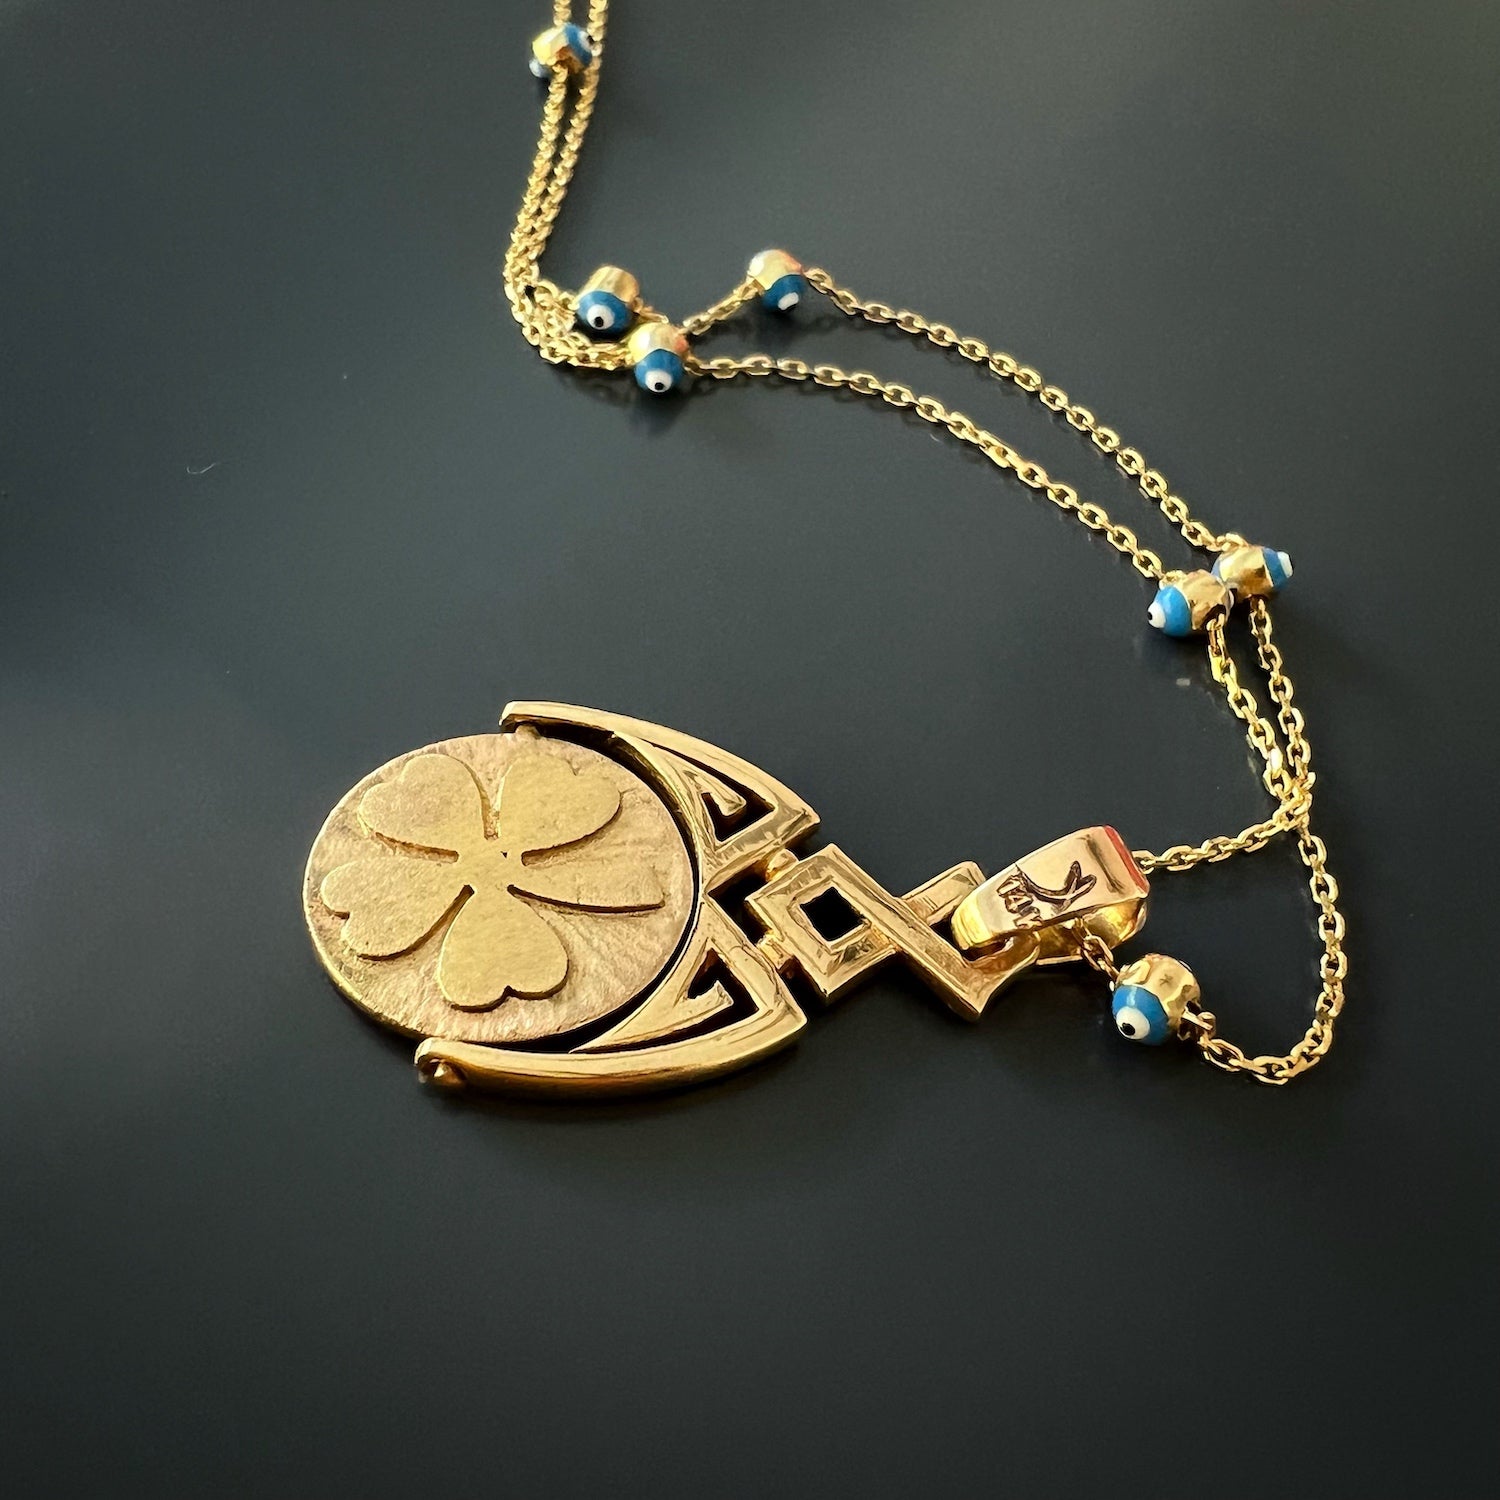 Gold and Diamond Evil Eye Pendant Necklace - Handmade from 14k yellow gold, this necklace features a captivating Evil Eye pendant adorned with diamonds and vibrant blue and yellow enamel, adding a touch of elegance and symbolism to any outfit.